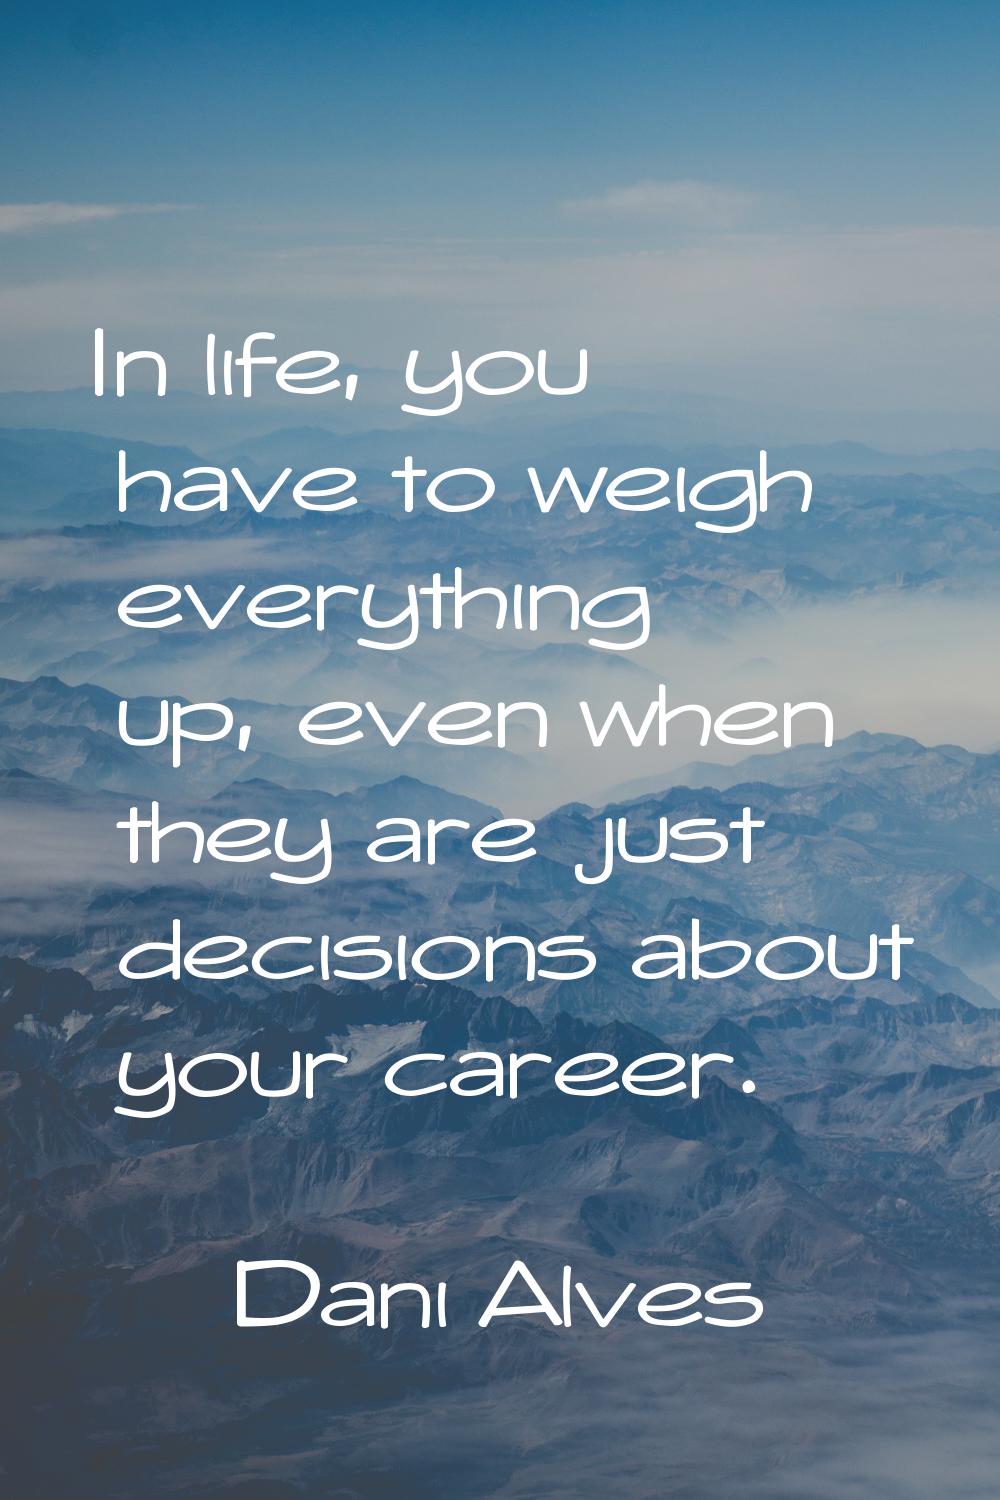 In life, you have to weigh everything up, even when they are just decisions about your career.